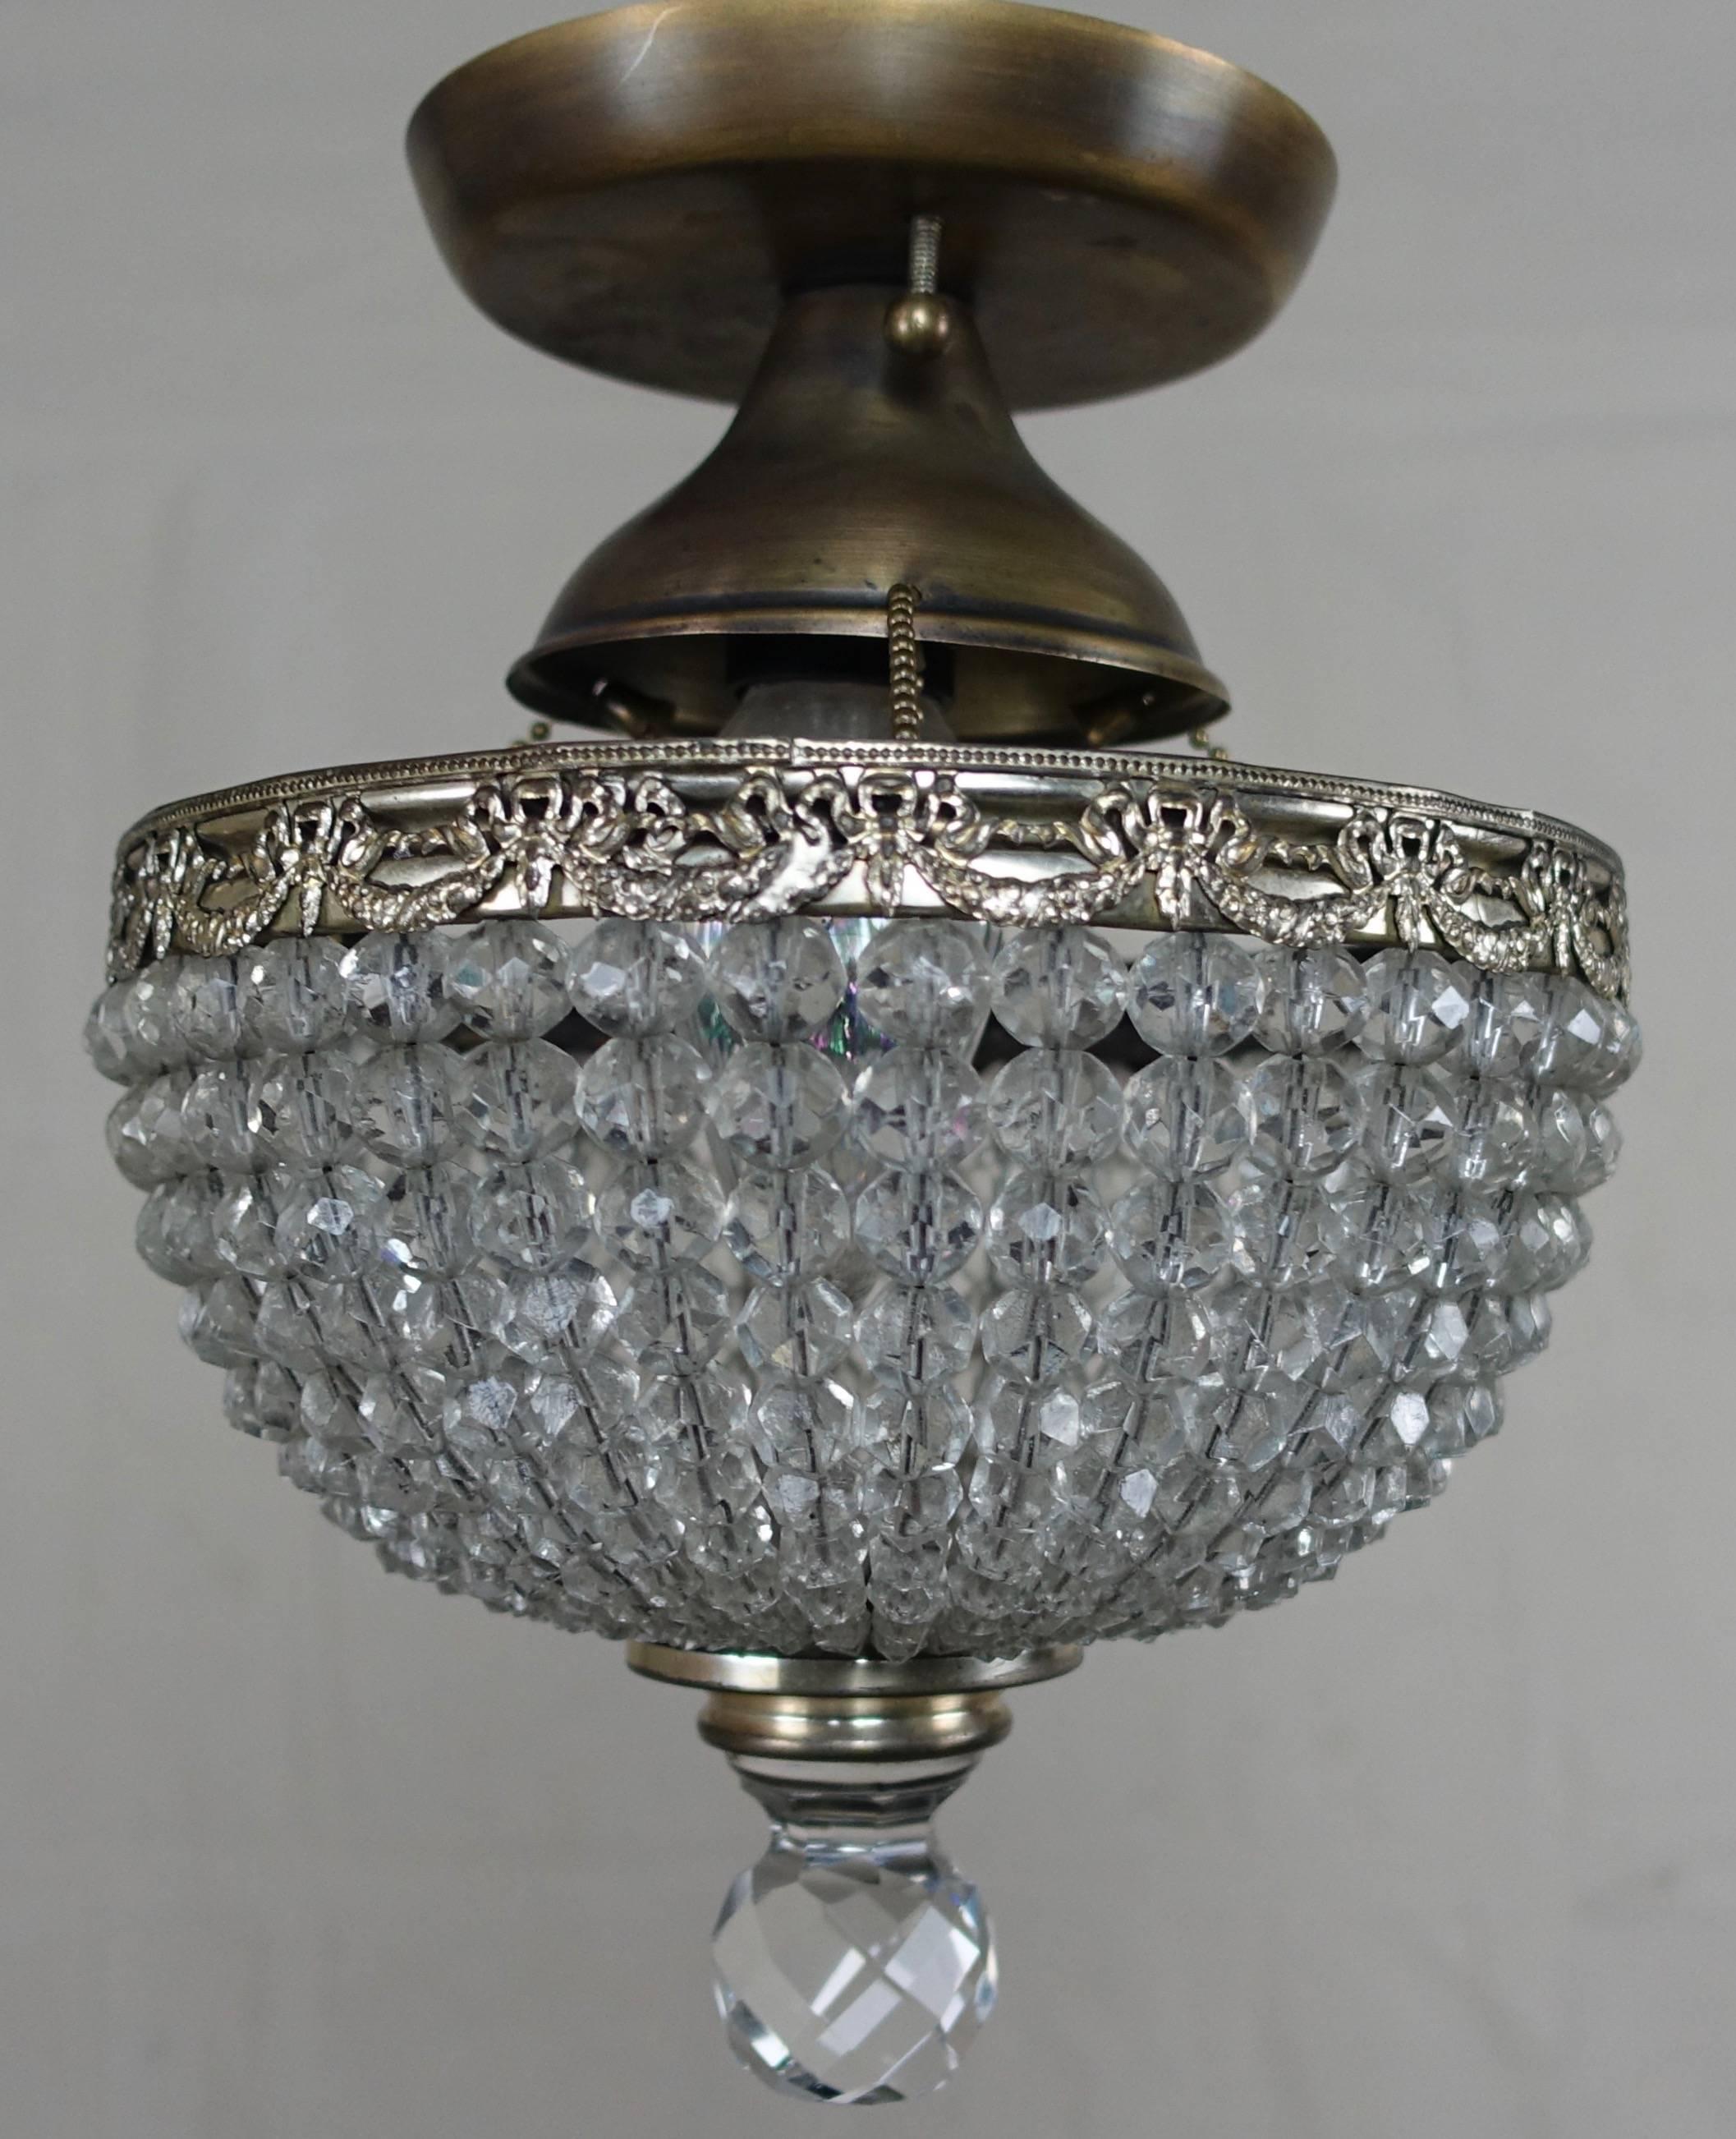 French brass and crystal beaded platfonnier. It is a perfect size for a small bathroom or closet.